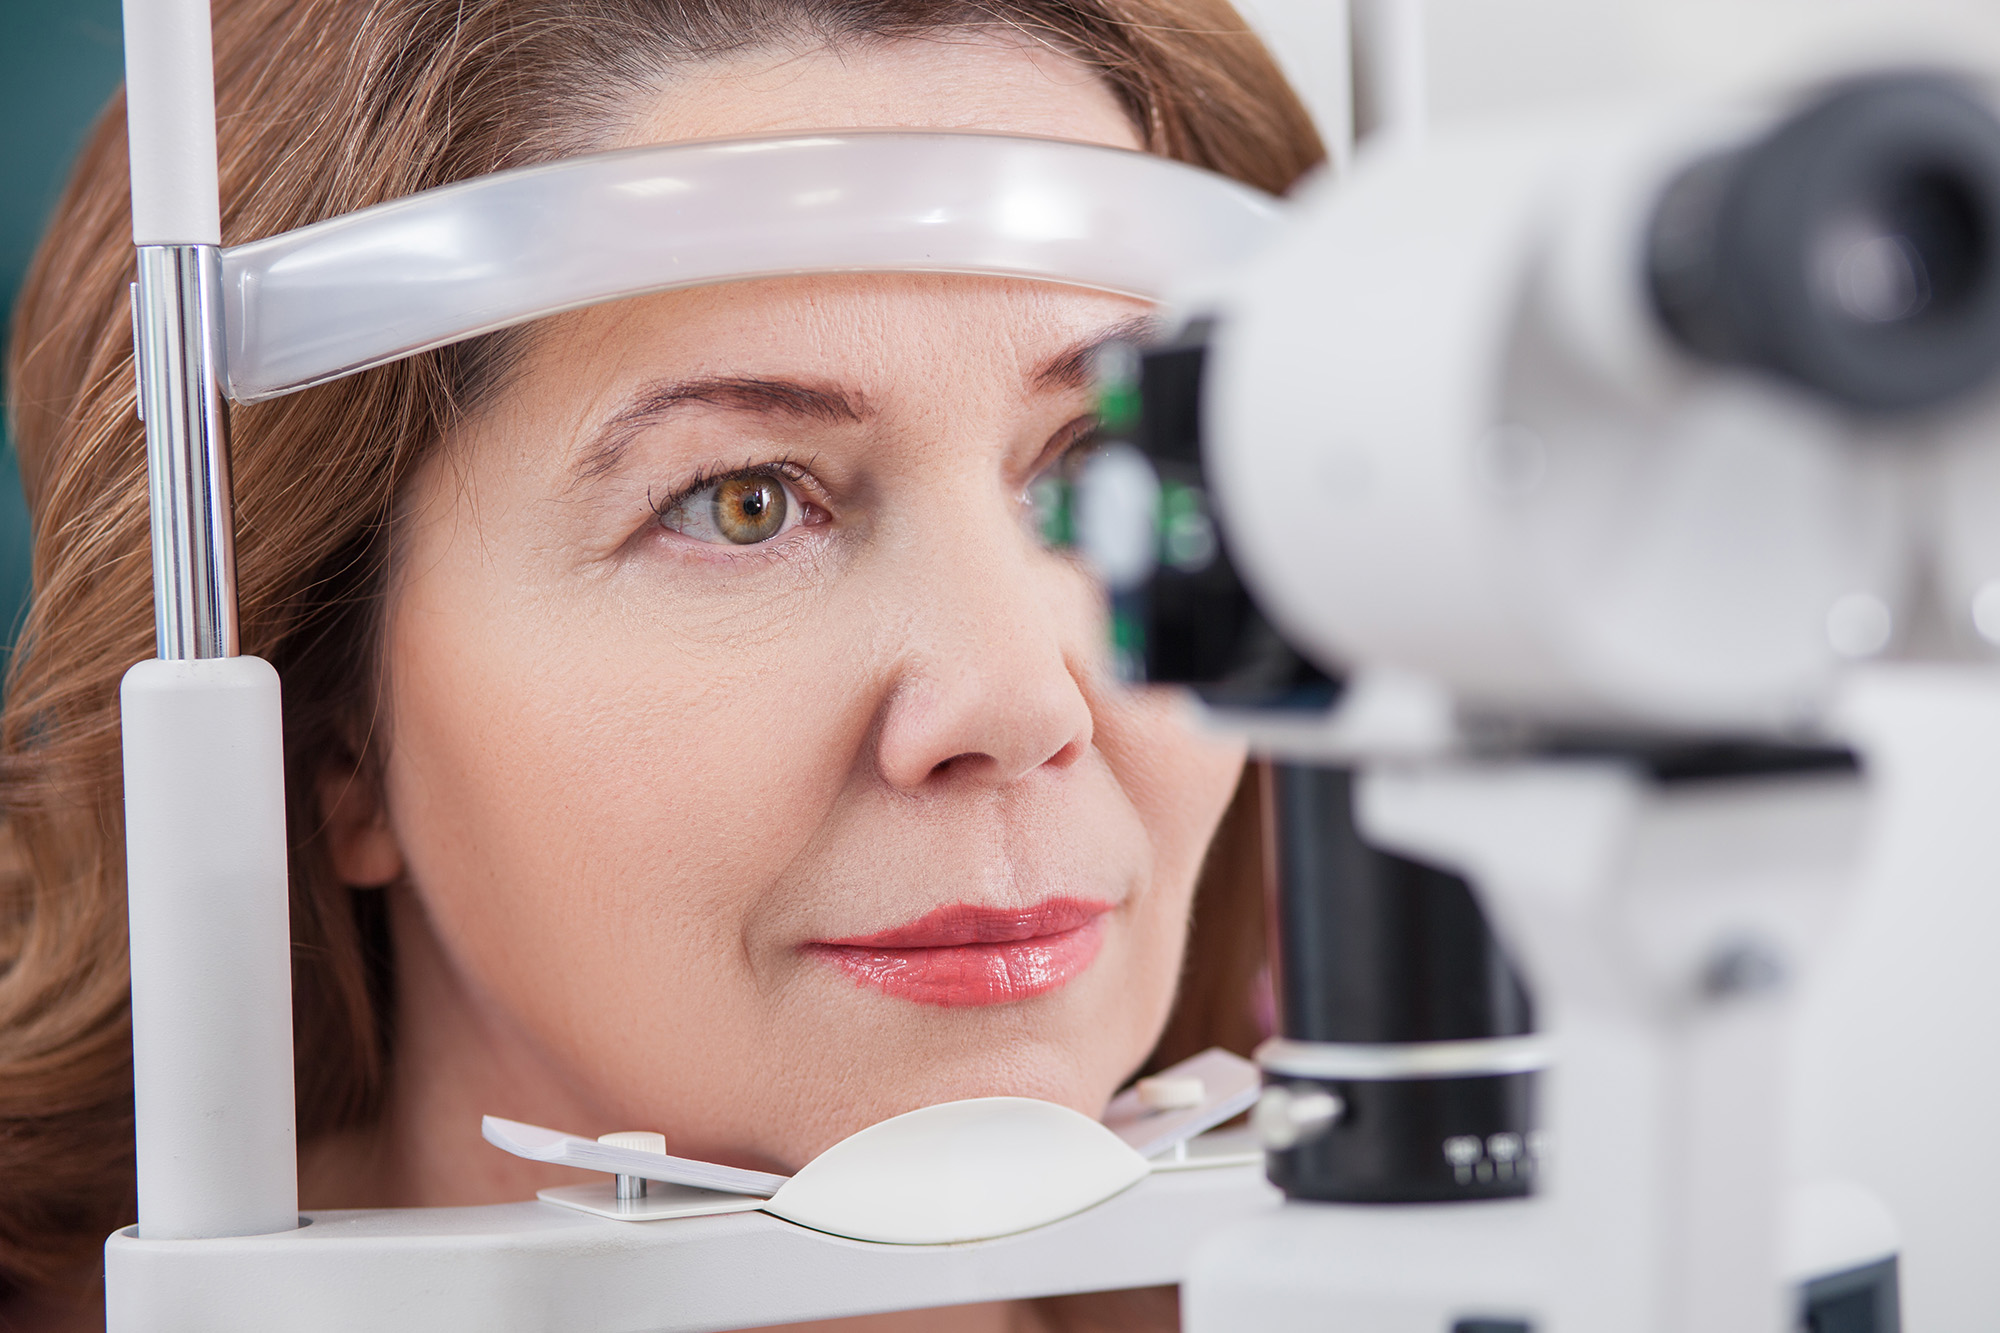 Laser Eye Surgery Malpractice, mistakes and injuries, medical negligence